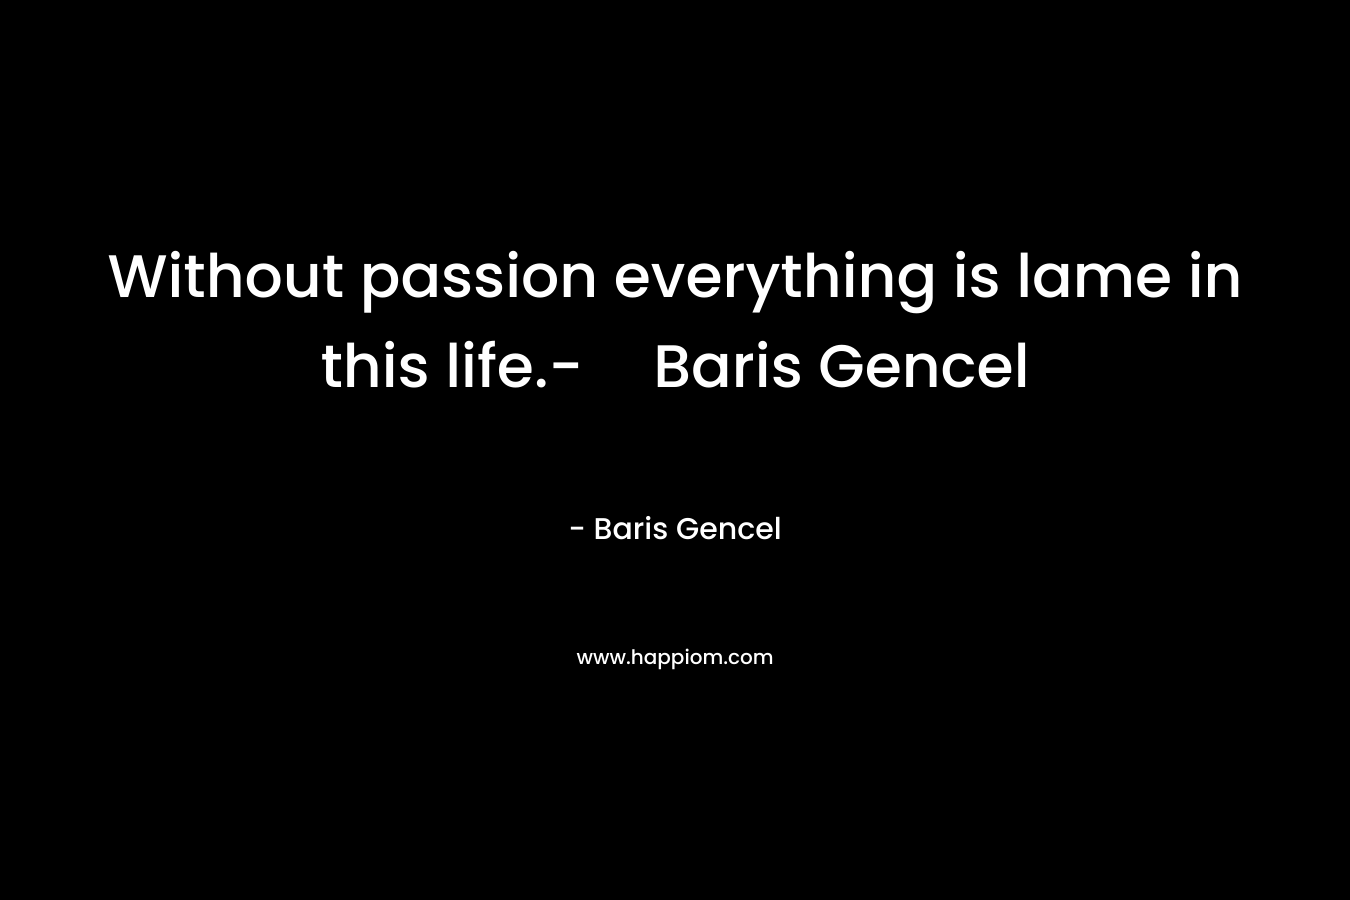 Without passion everything is lame in this life.-Baris Gencel